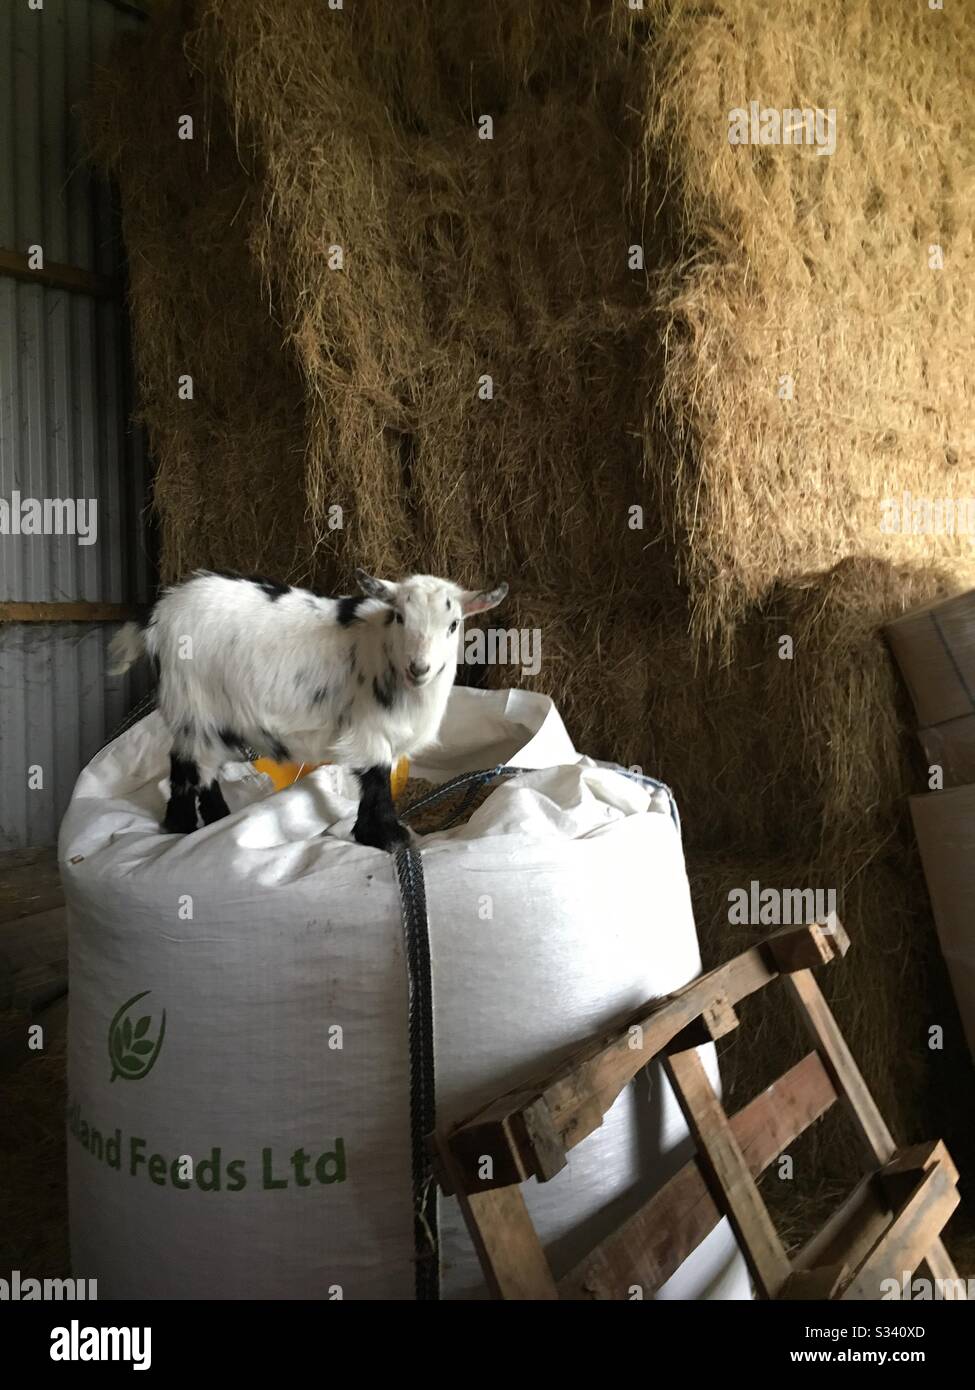 Pigmy goat standing on top of feed bag Stock Photo